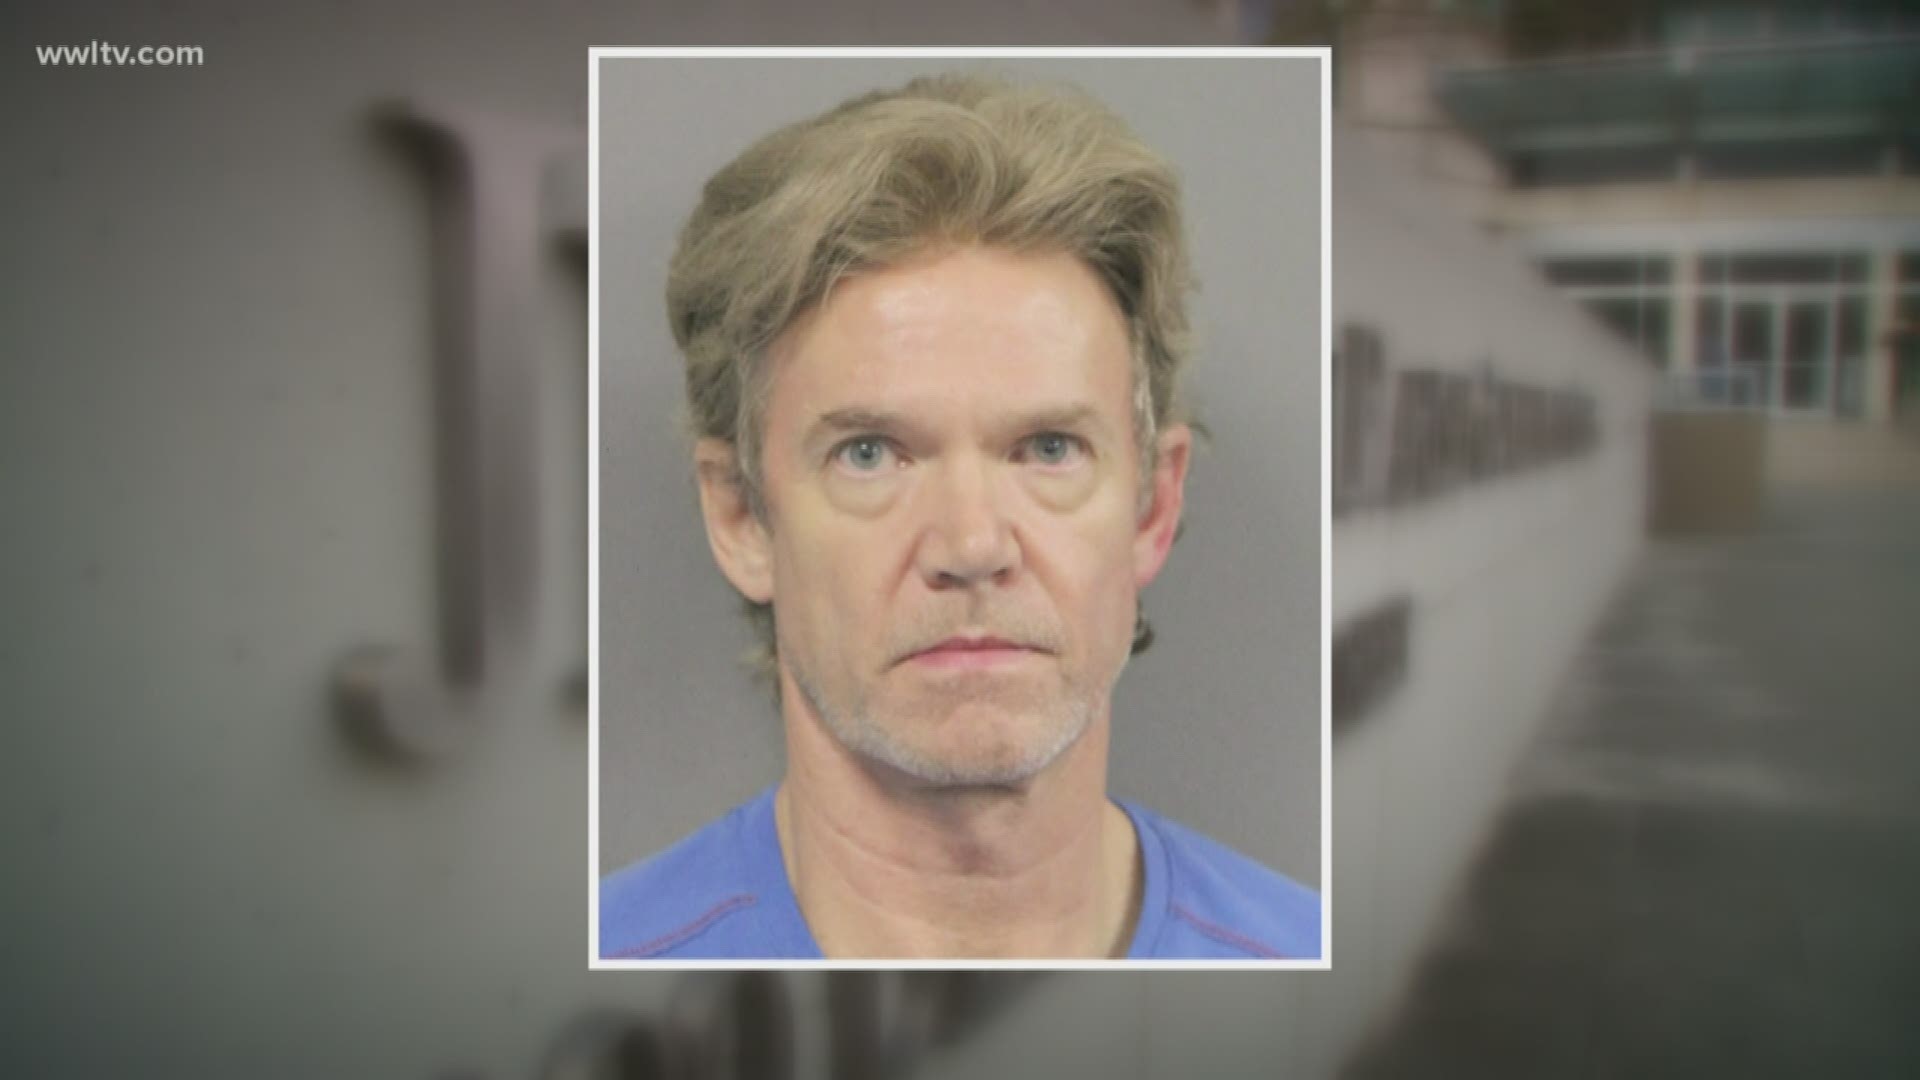 Ronald Gasser had appealed his manslaughter conviction, citing Louisiana's Stand Your Ground law and his 10-2 jury conviction.